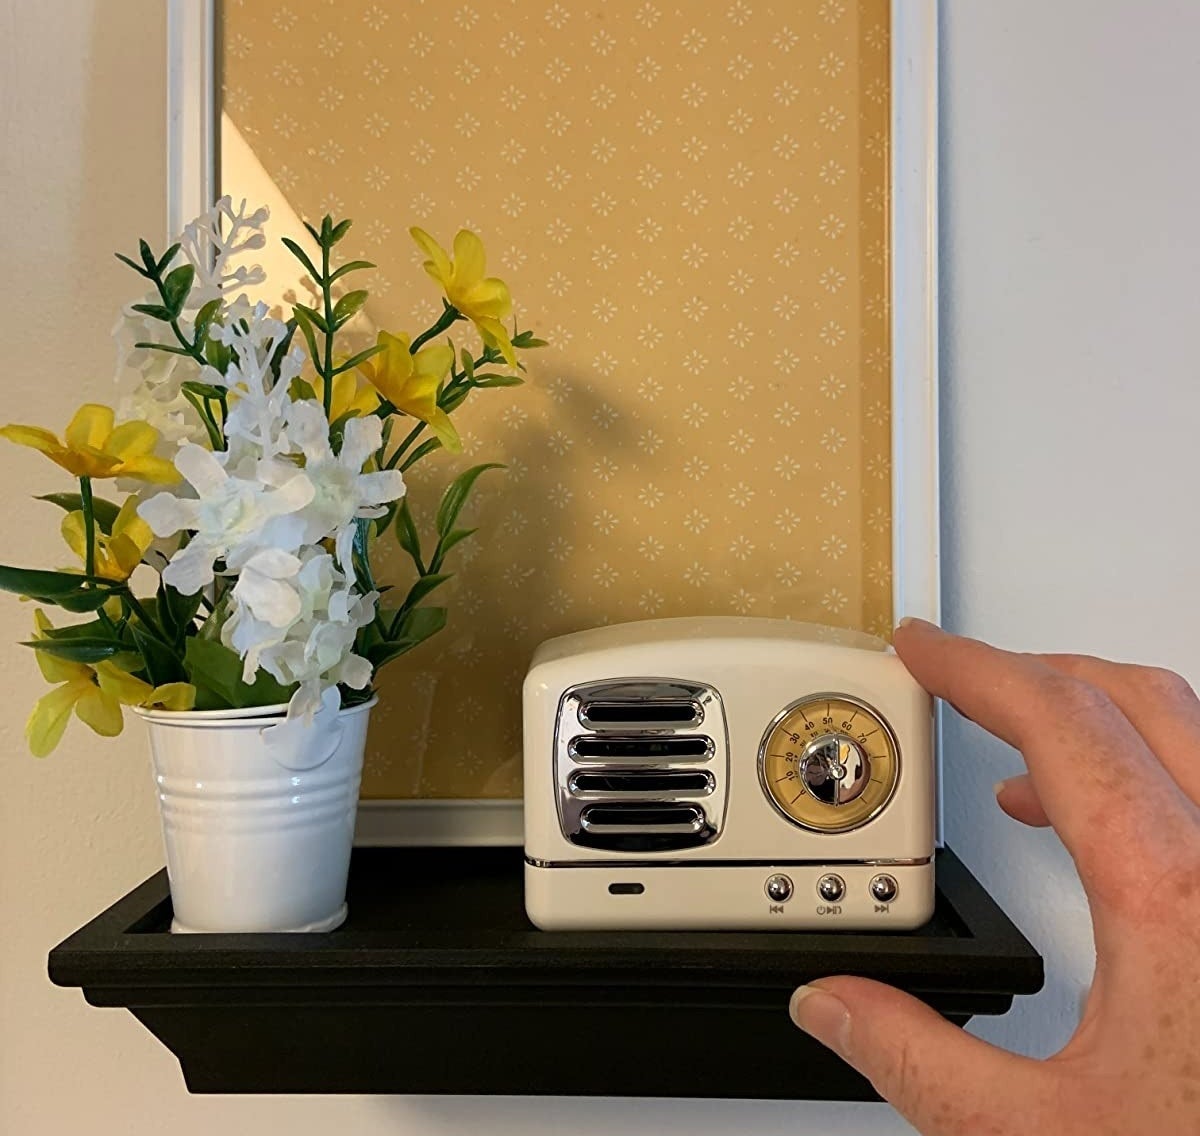 reviewer image of the white speaker on a wall-mounted shelf